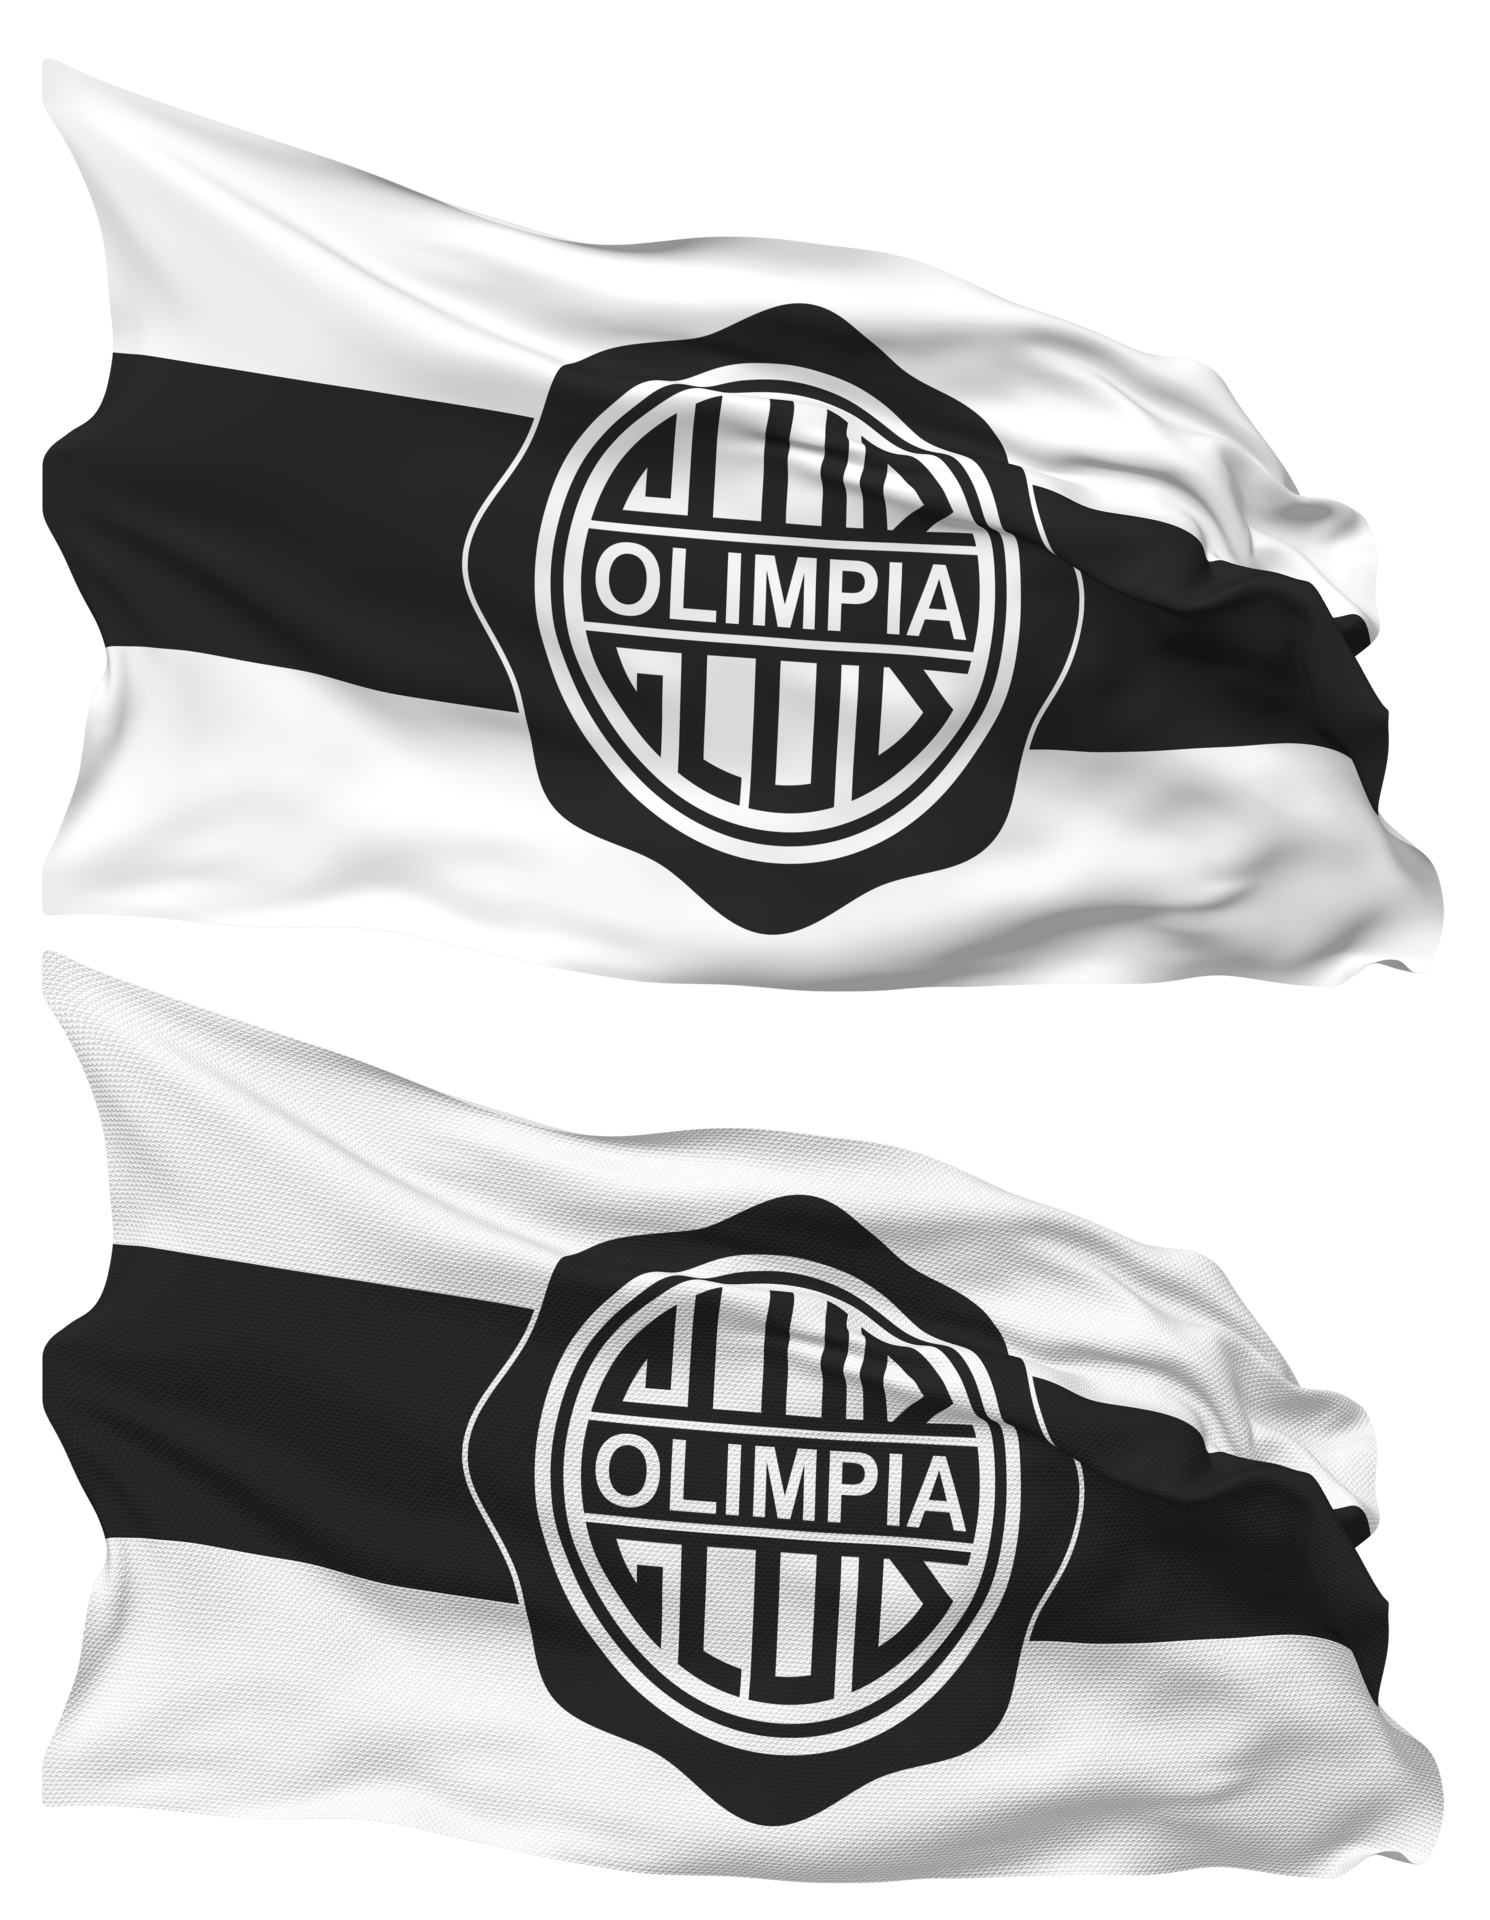 Club Olimpia Flag Waves Isolated in Plain and Bump Texture, with